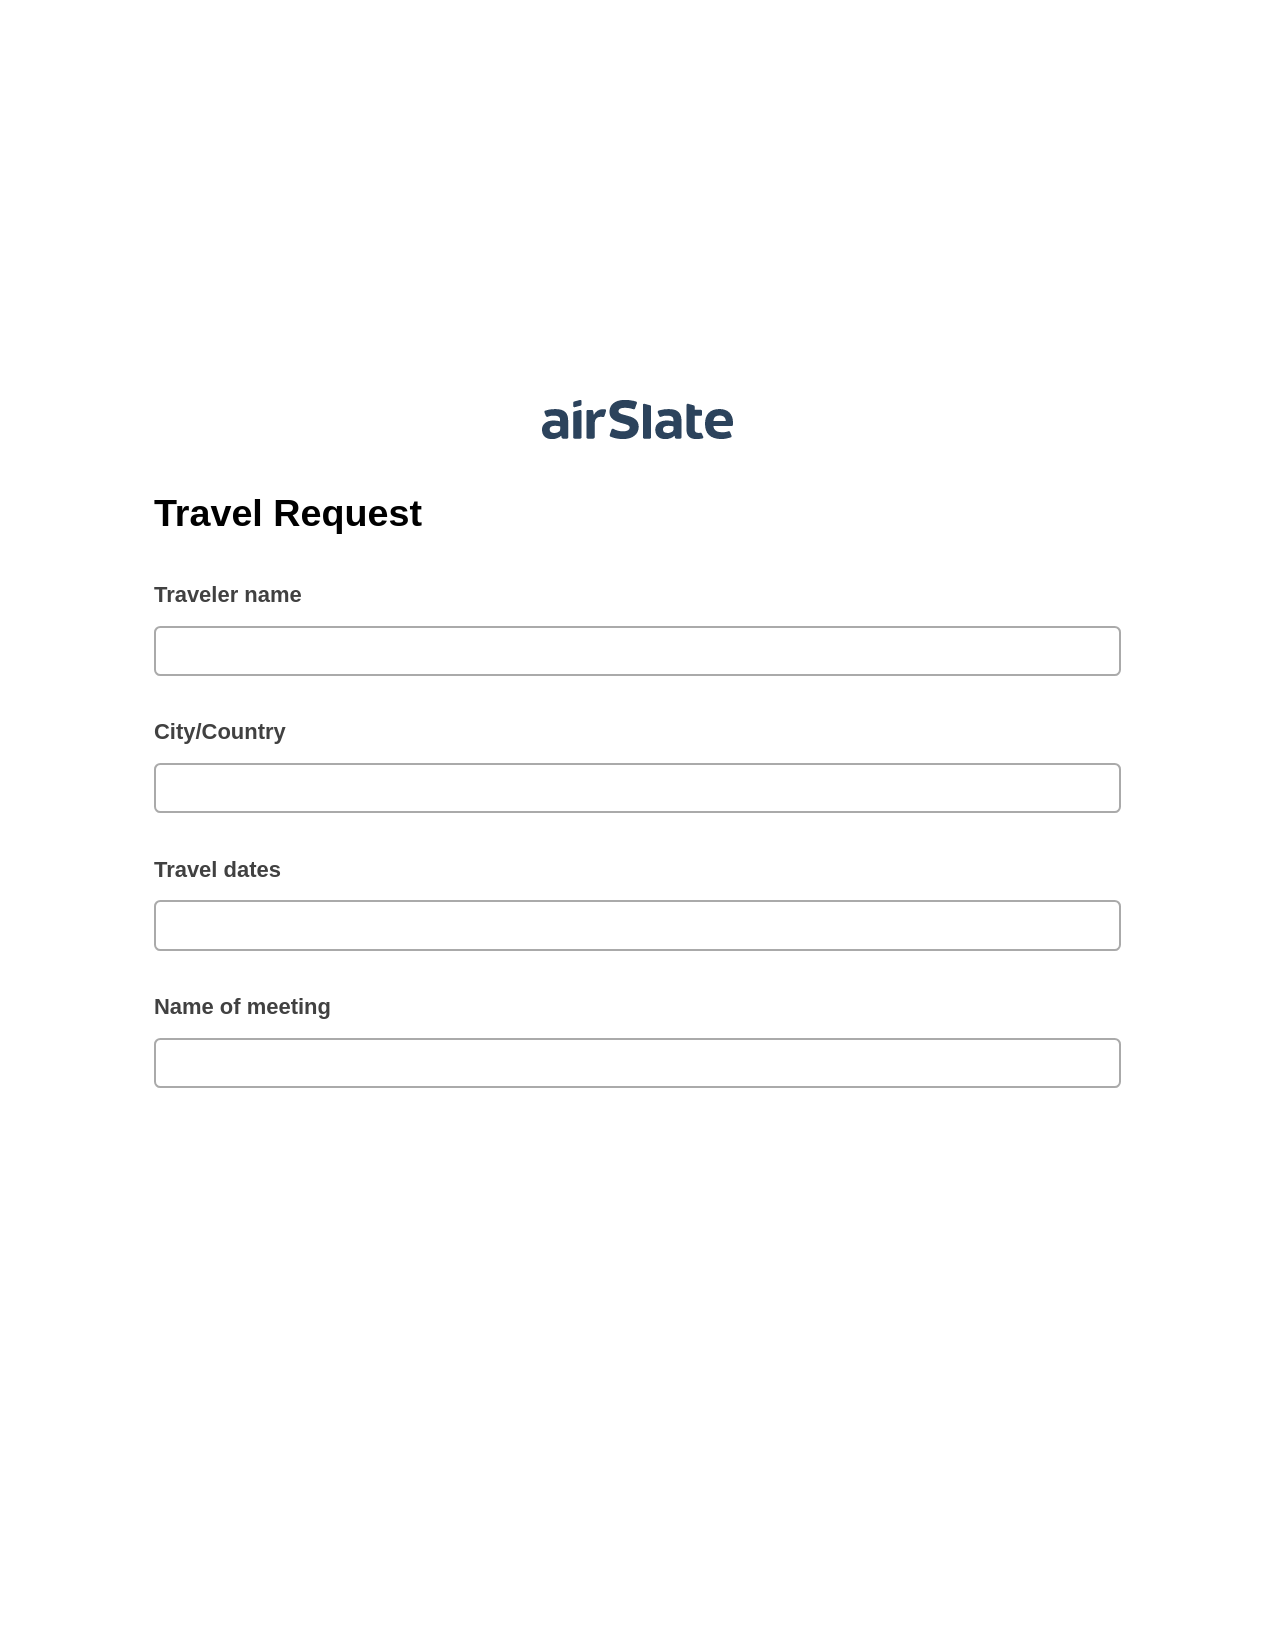 Travel Request Pre-fill Document Bot, Pre-fill with Custom Data Bot, OneDrive Bot